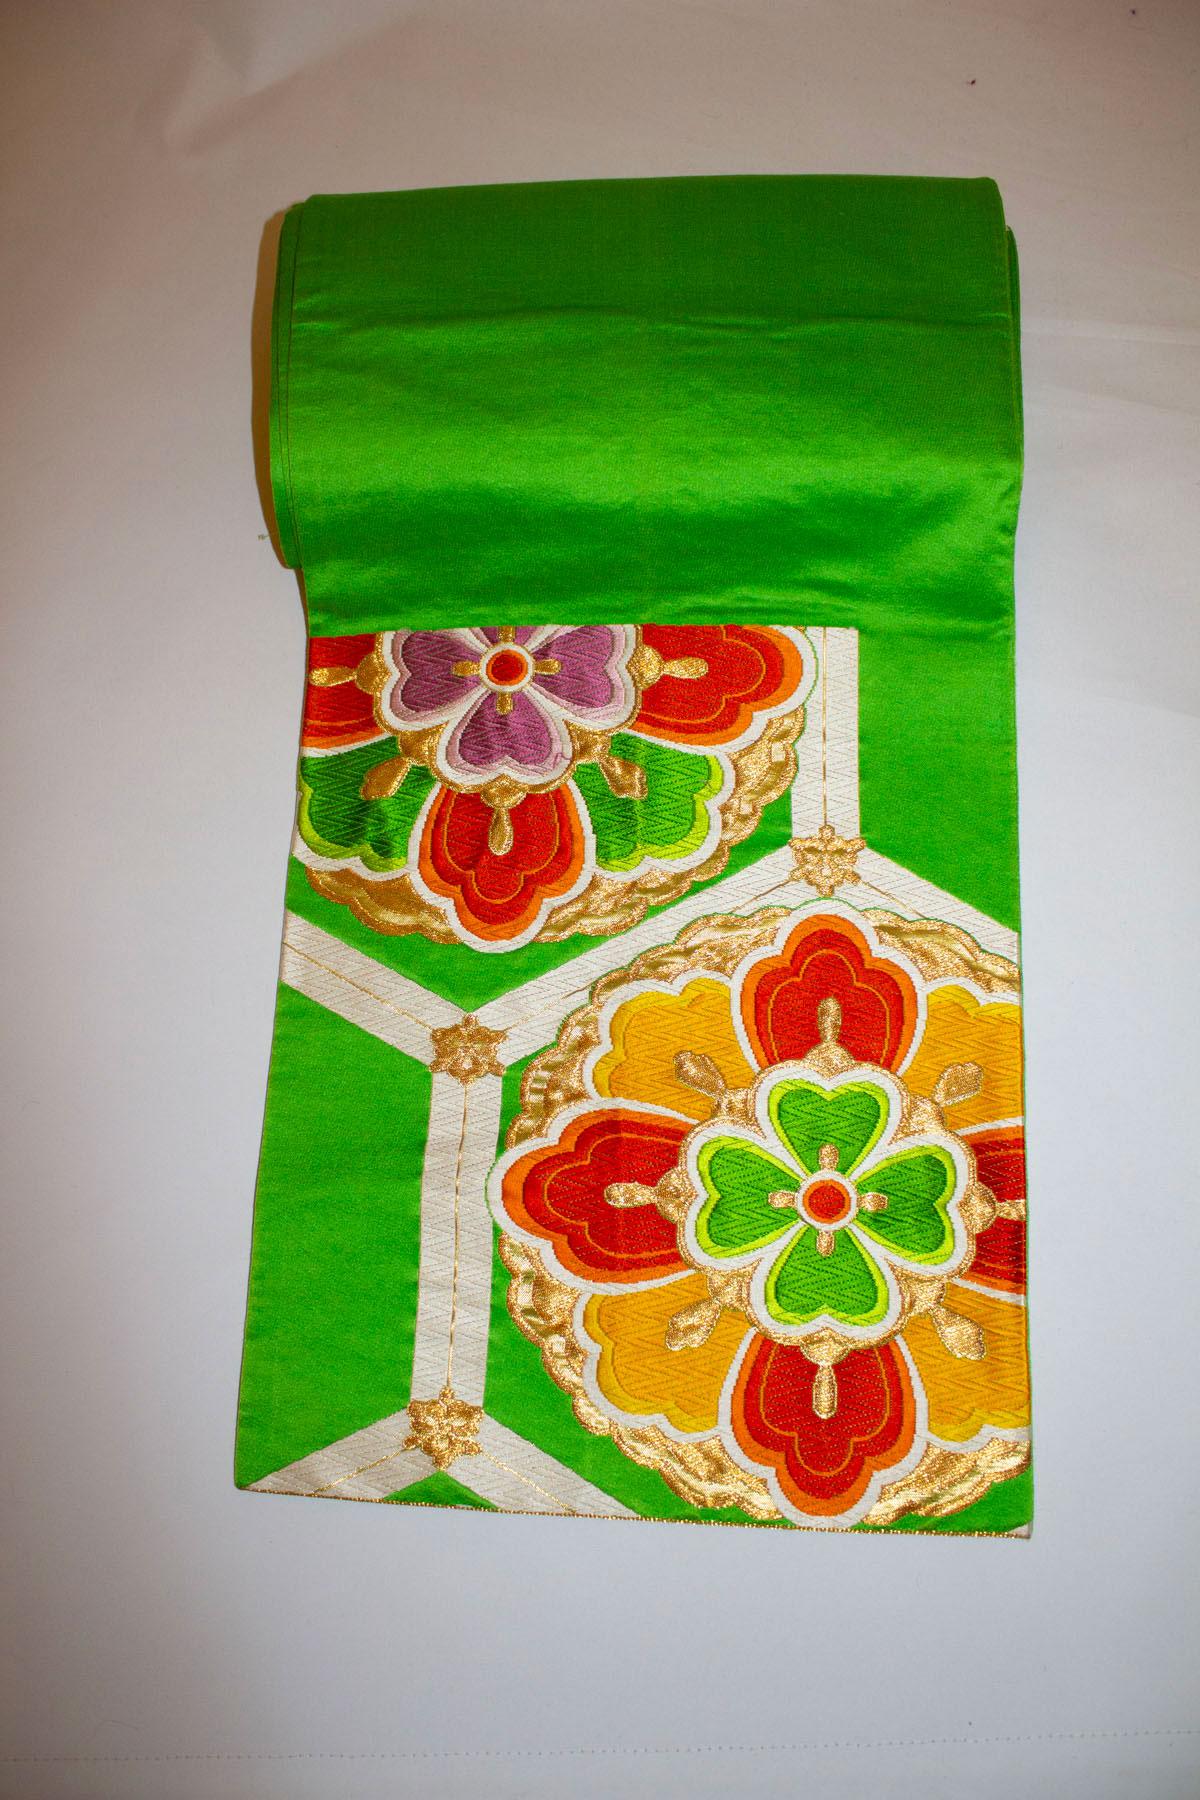 A stunning Obi belt for Spring. The belt has a bright green background, and a hexagaonal design with green, purple and orange flowers. Total length 12'' x 162'', embroidered panels measure. 12'' x 14'' and 12'' x 102''